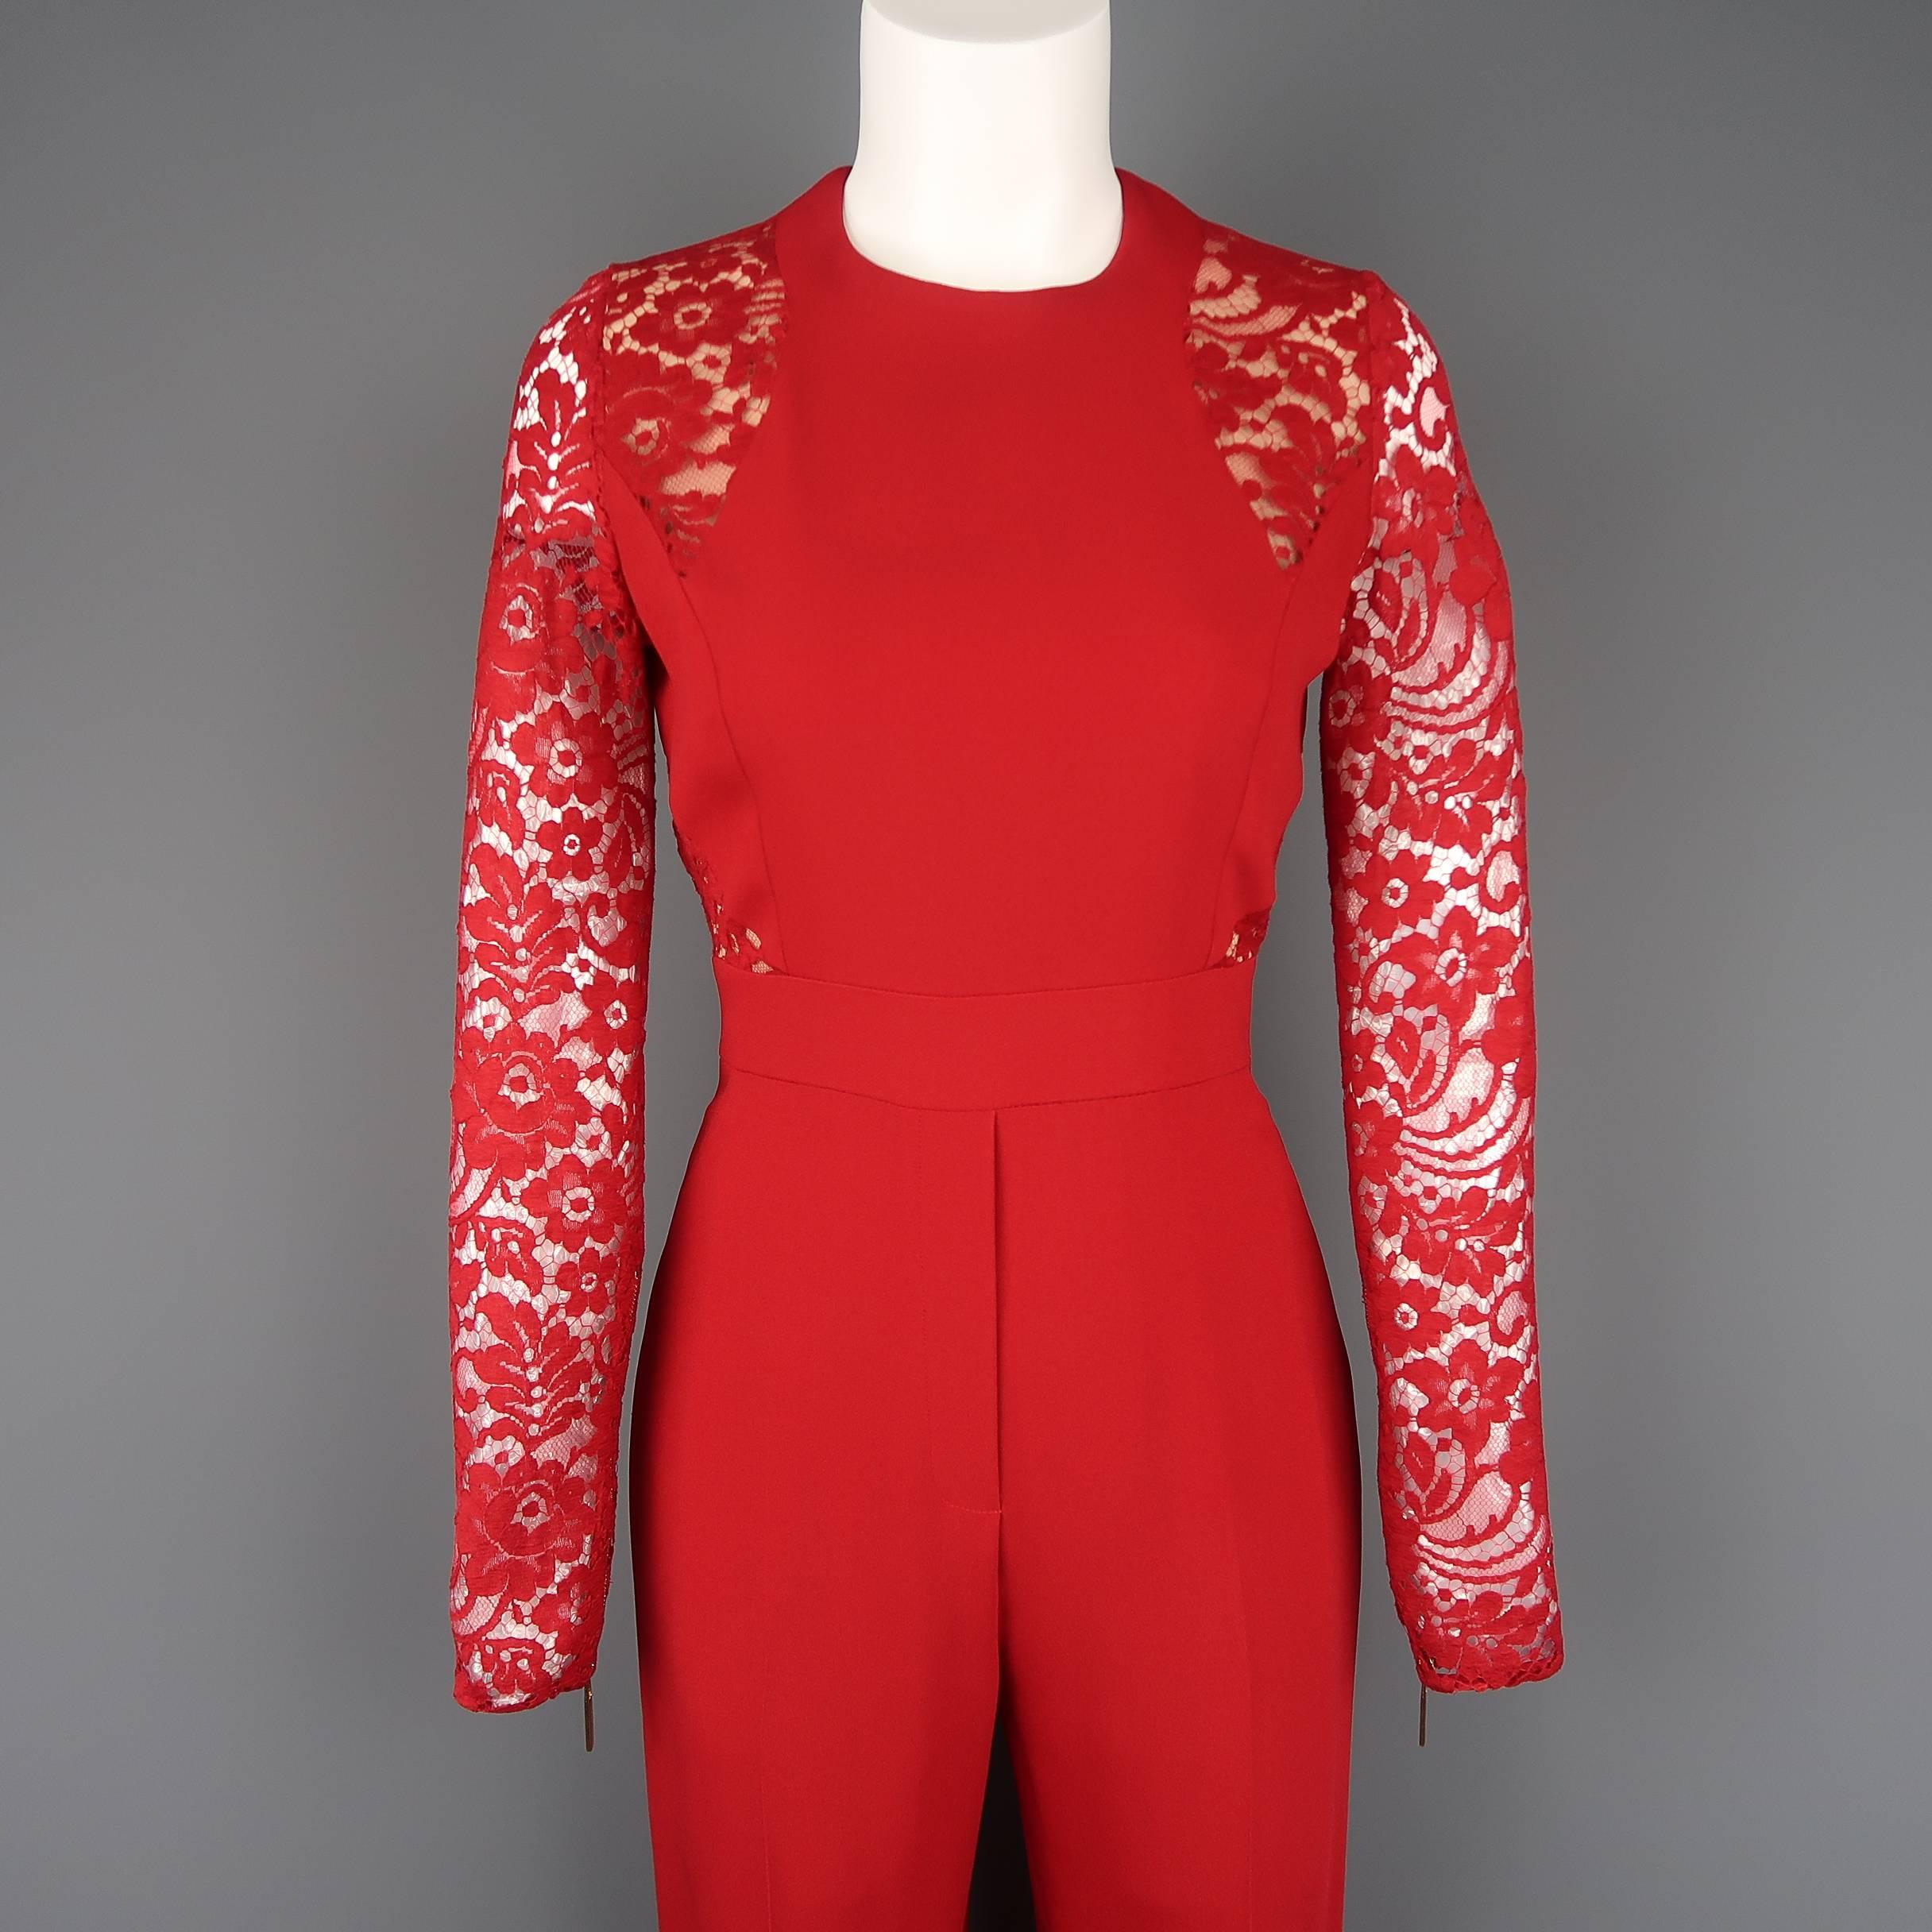 Elie Saab jumpsuit comes in red crepe material with lace long sleeves with zip cuffs, beige lined lace panels, and high rise flared flat front pants. With red leather skinny belt. Made in Italy.
 
Excellent Pre-Owned Condition.
Marked: FR 36
